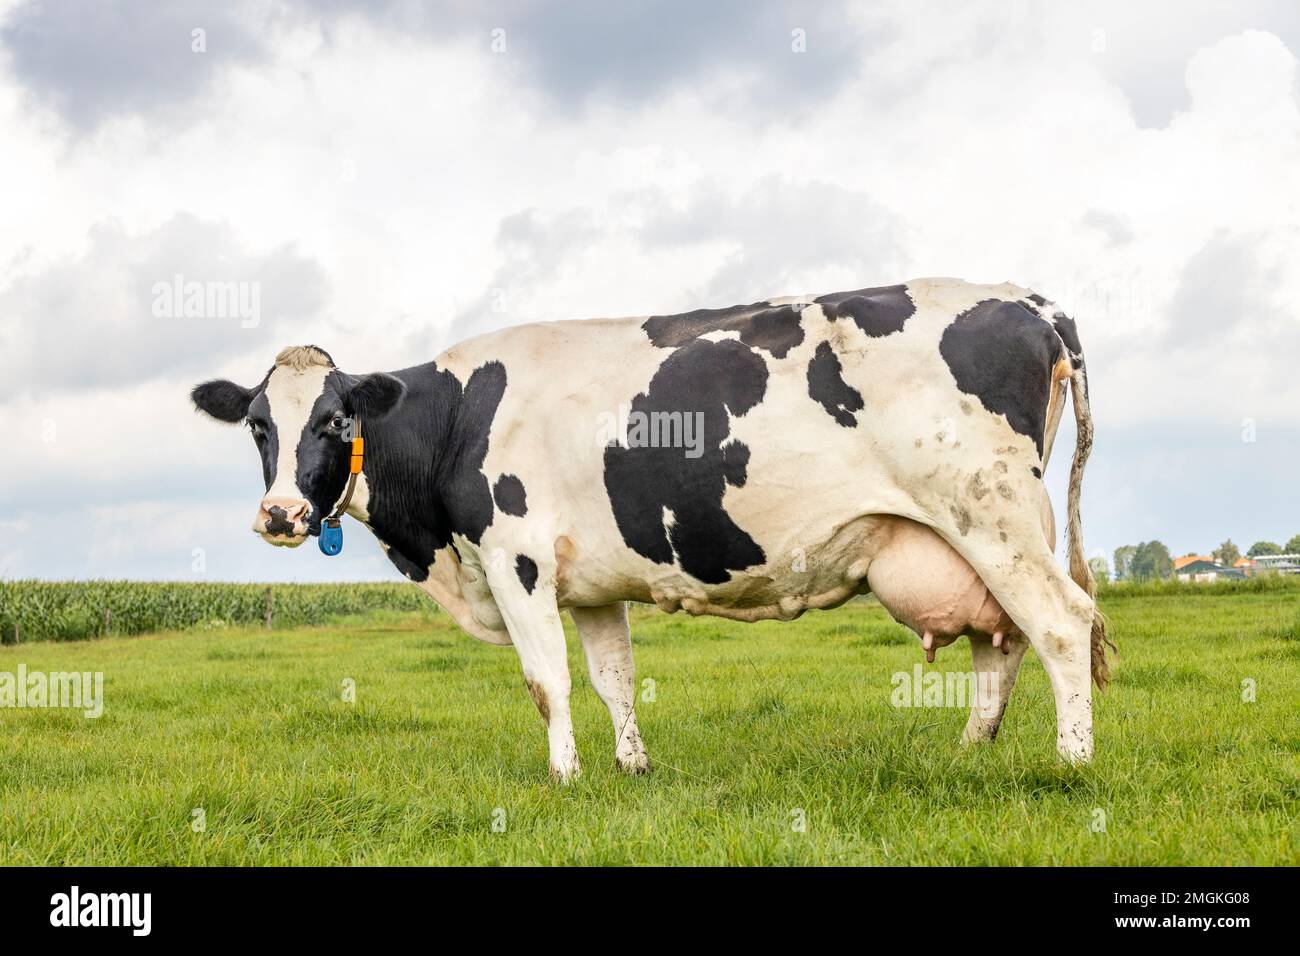 Cow black mottled with round large udder in the Netherlands, standing in a pasture, green grass in a field and a blue cloudy sky, full length side vie Stock Photo